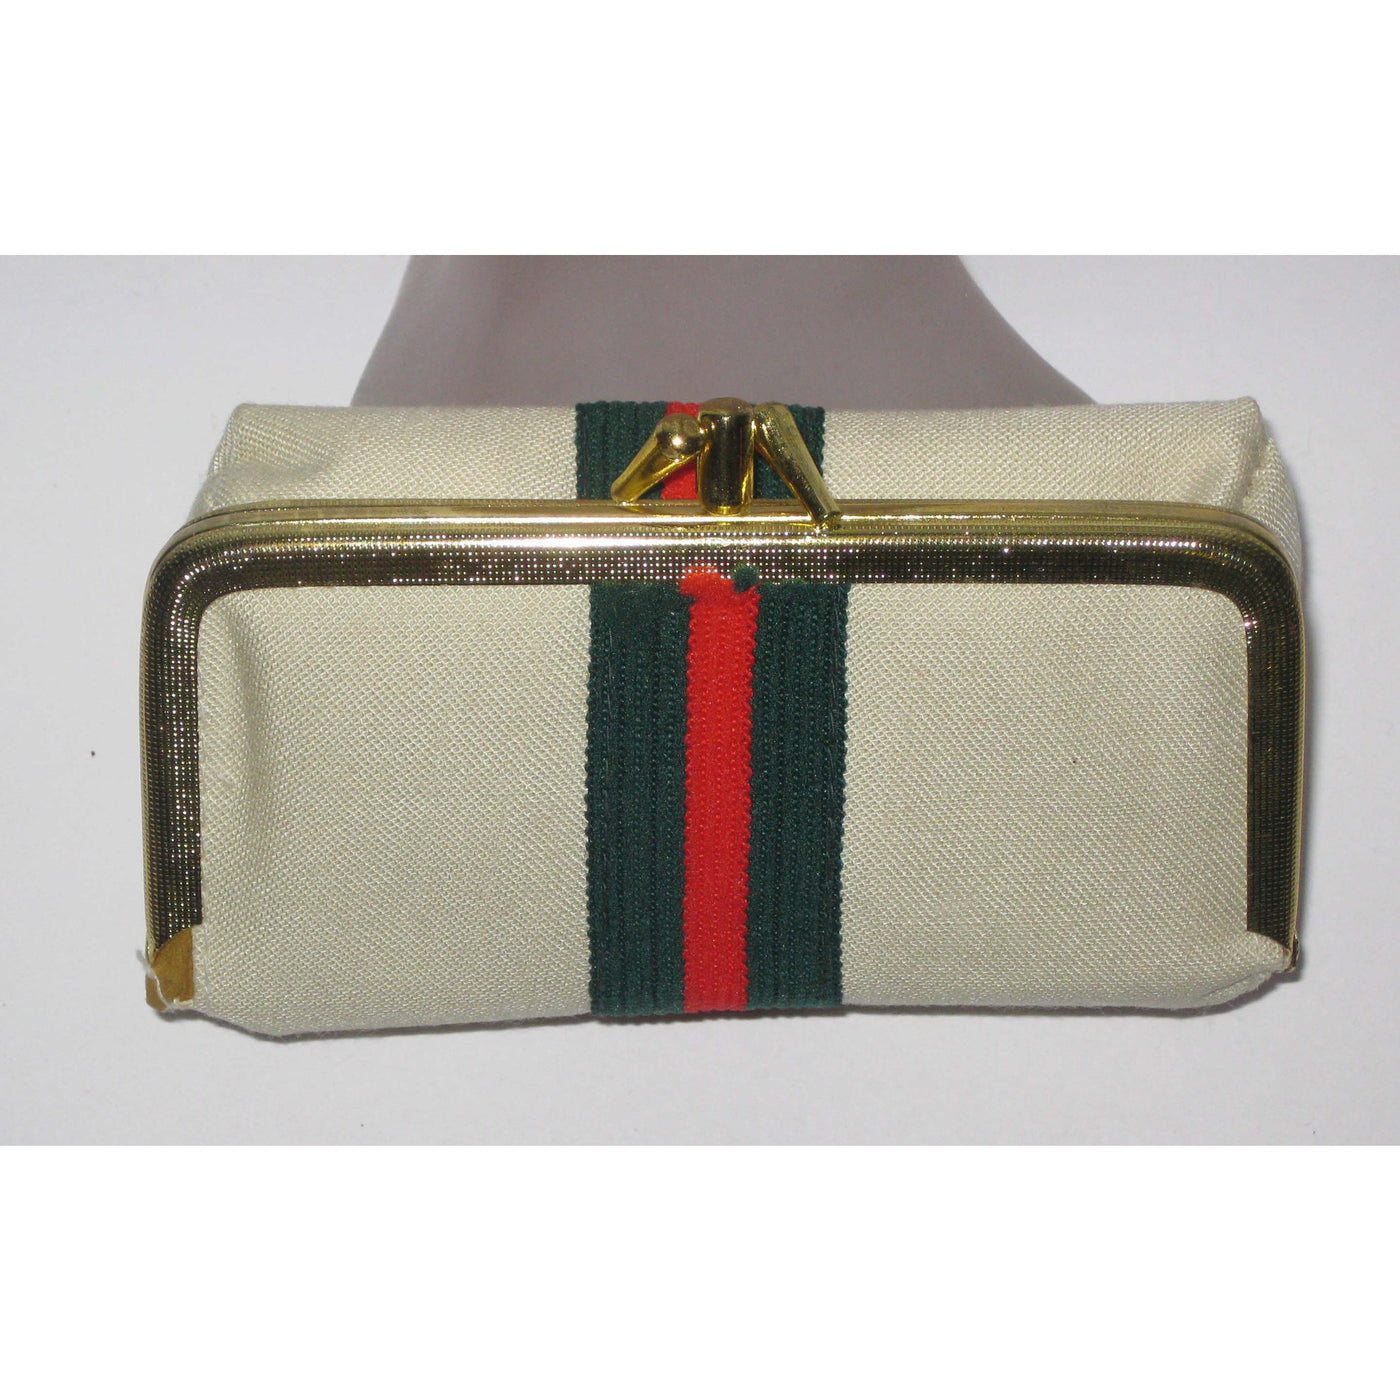 Vintage Striped Canvas All-n-One Coin Purse